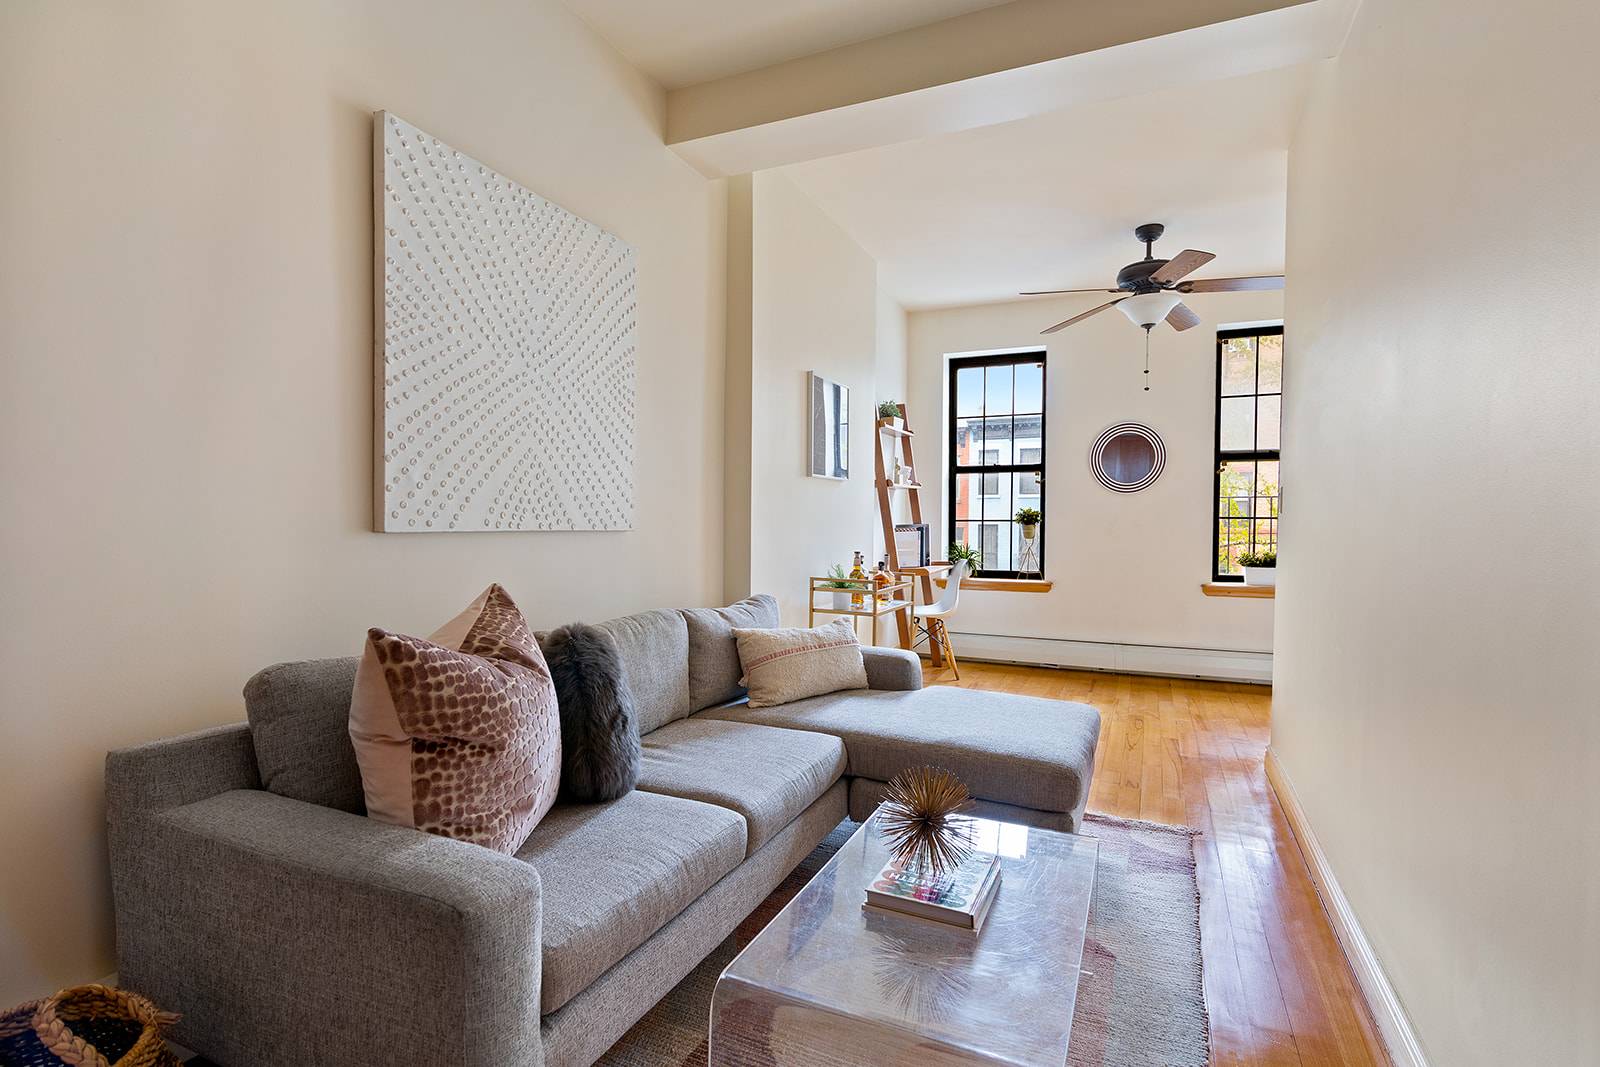 This stunning one bedroom is set in a boutique condominium in Park Slope, one of Brooklyn's most coveted neighborhoods, with Prospect Park and all the best of brownstone Brooklyn steps ...